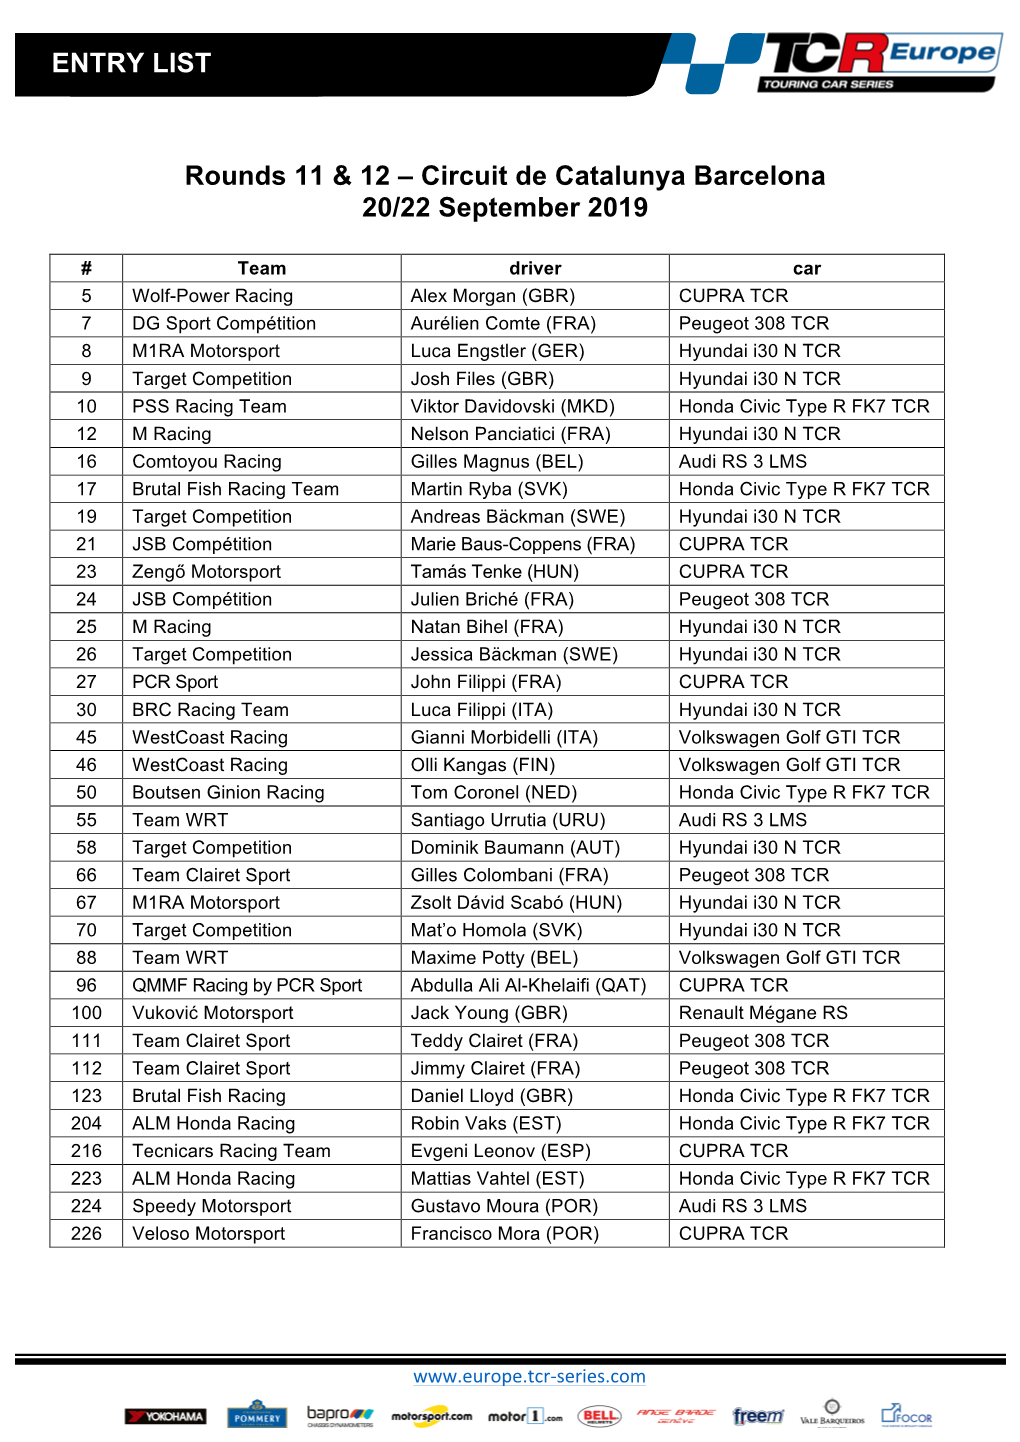 ENTRY LIST Rounds 11 & 12